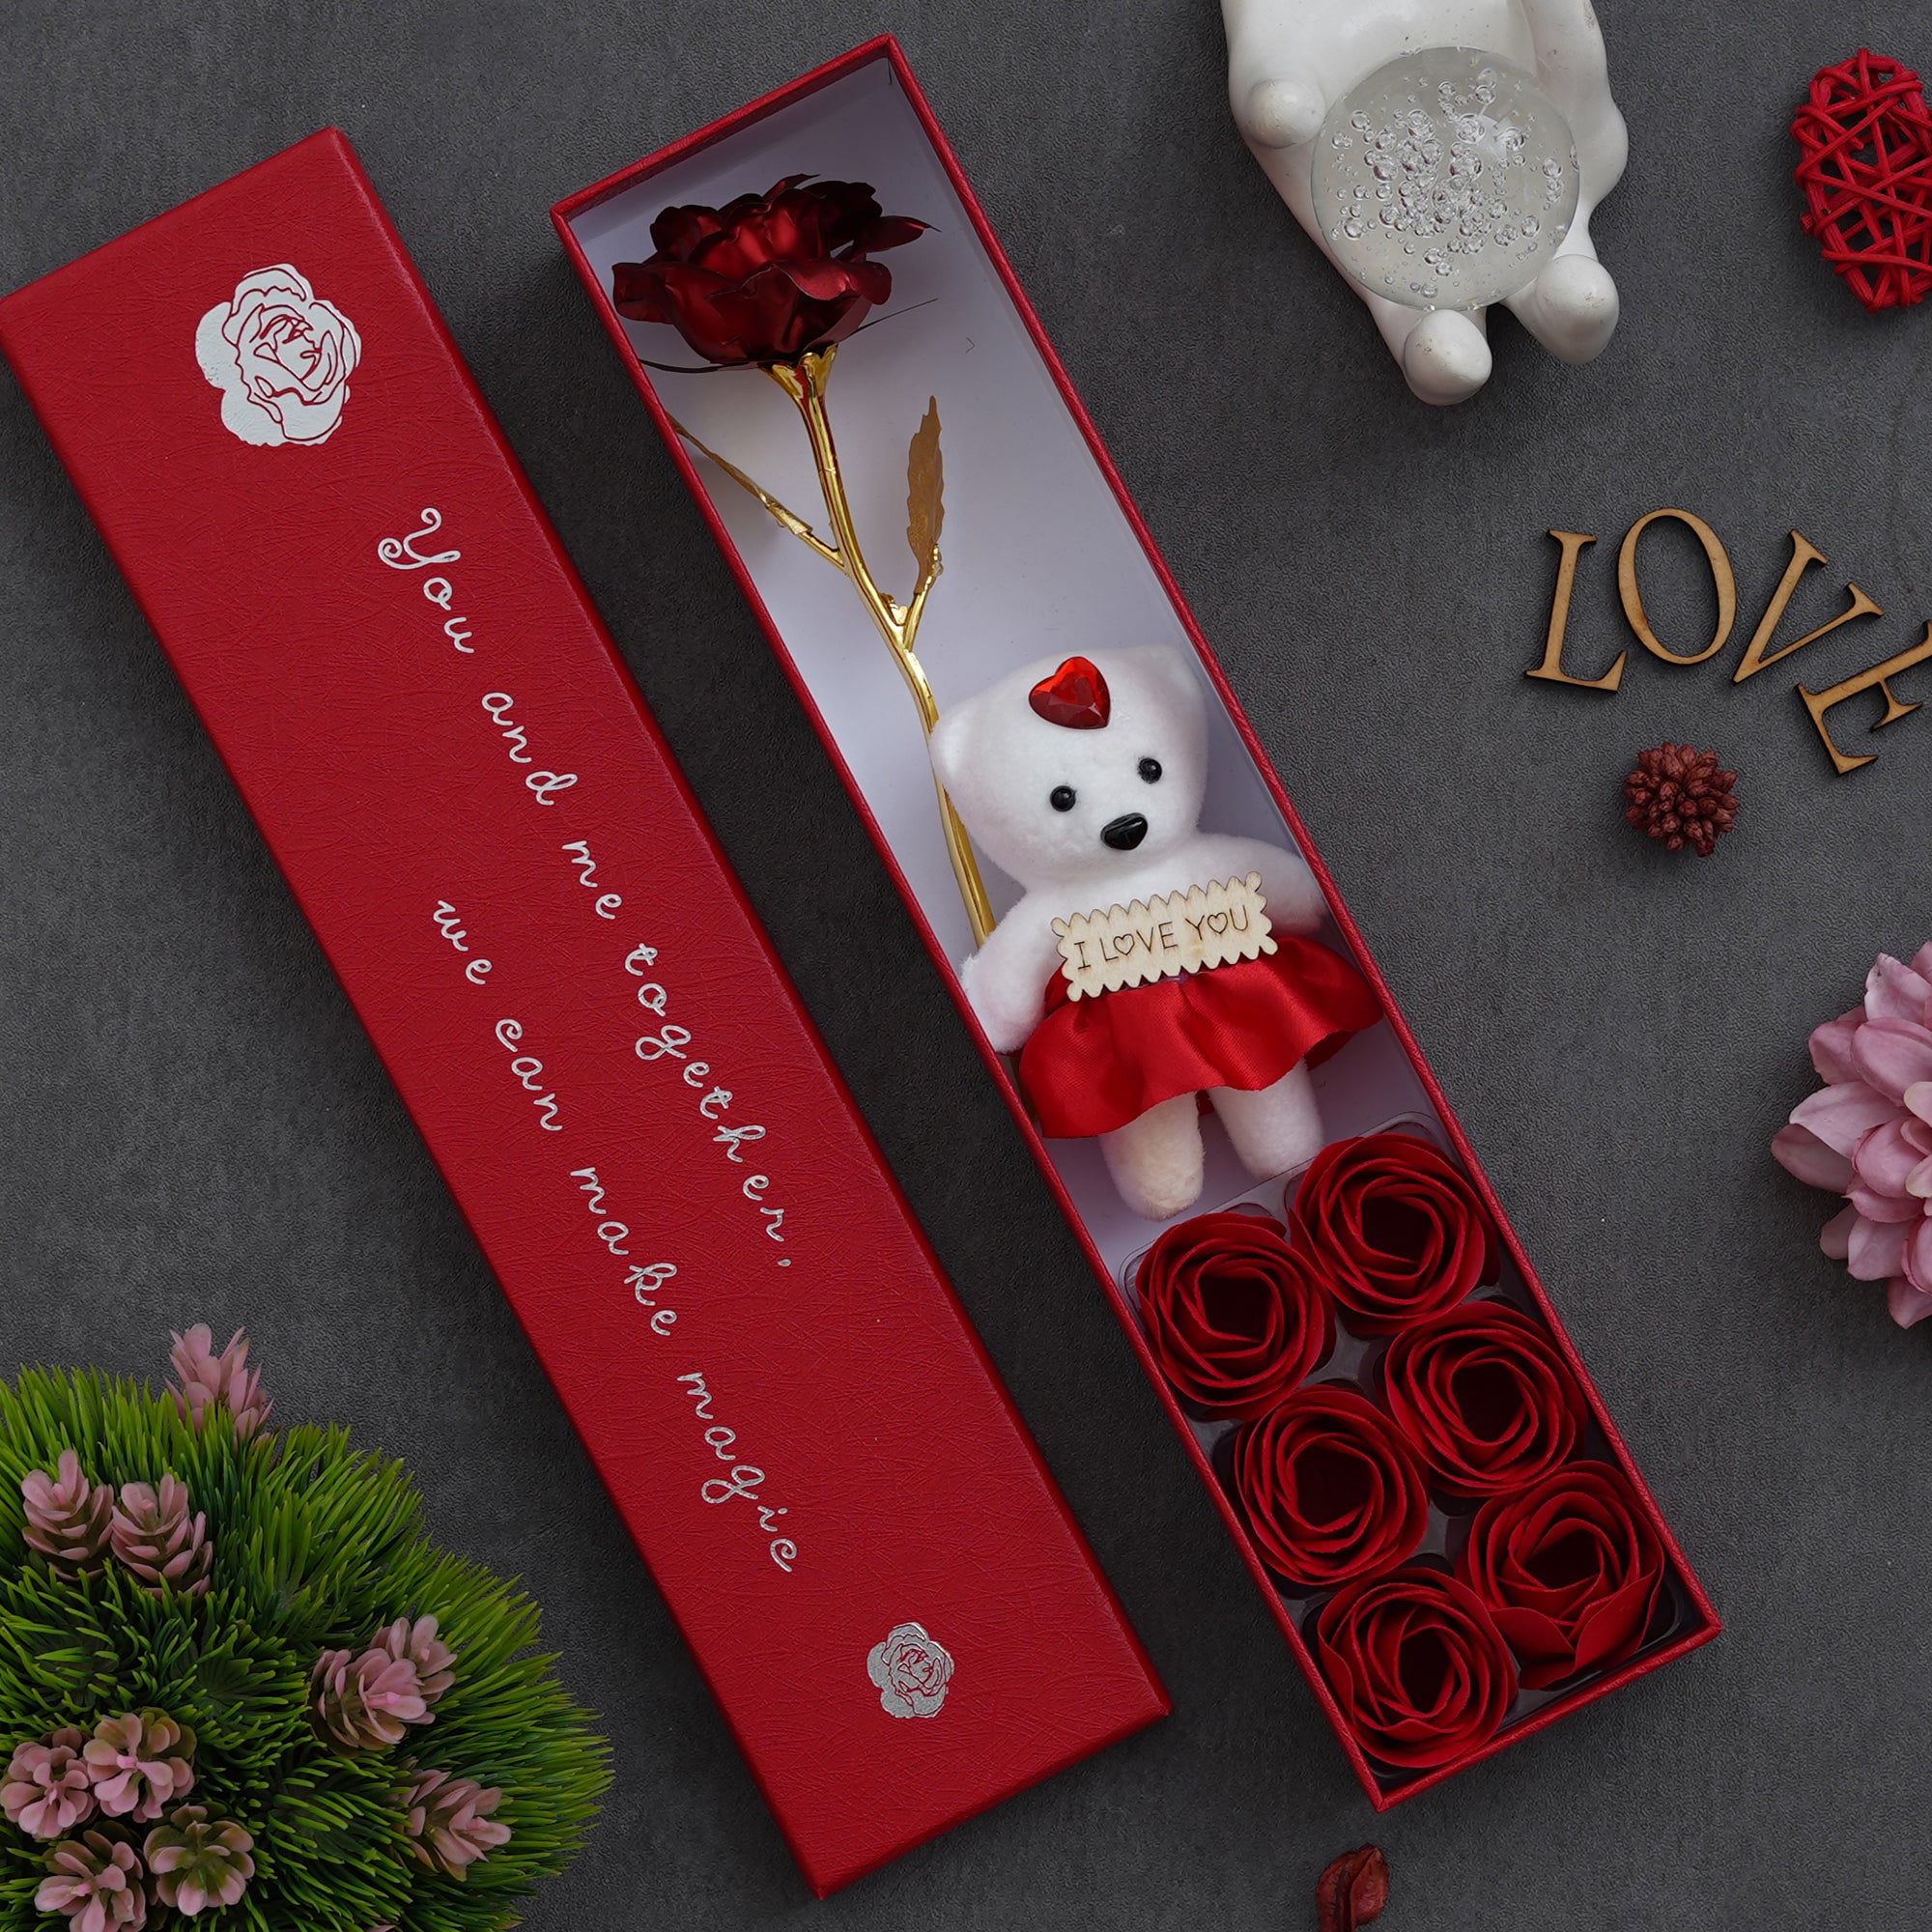 Valentine Combo of Pack of 12 Love Coupons Gift Cards Set, Red Gift Box with Teddy & Roses, "20 Reasons Why I Love You" Printed on Little Red Hearts Decorative Wooden Gift Set Box 3